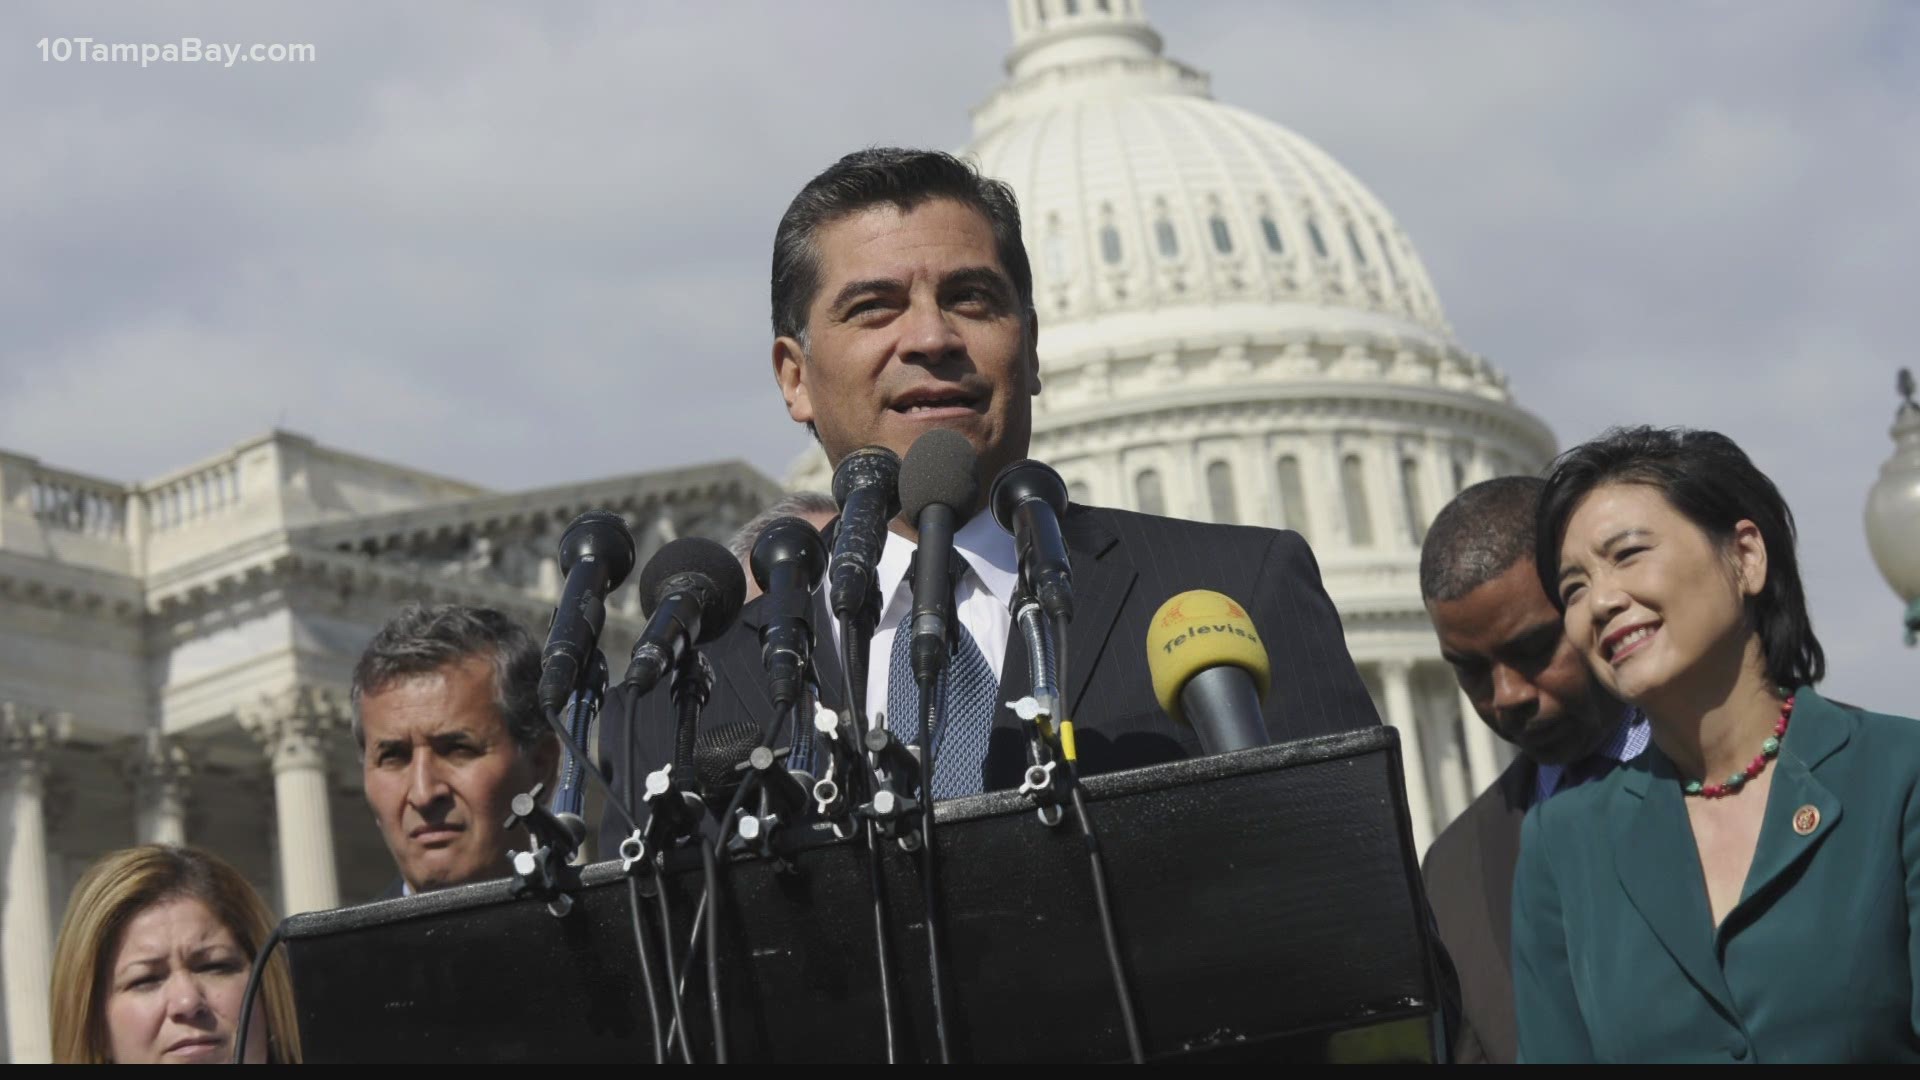 The president-elect has chosen California Attorney General Xavier Becerra, and if confirmed by the Senate, he'll be the first Latino to head HHS.